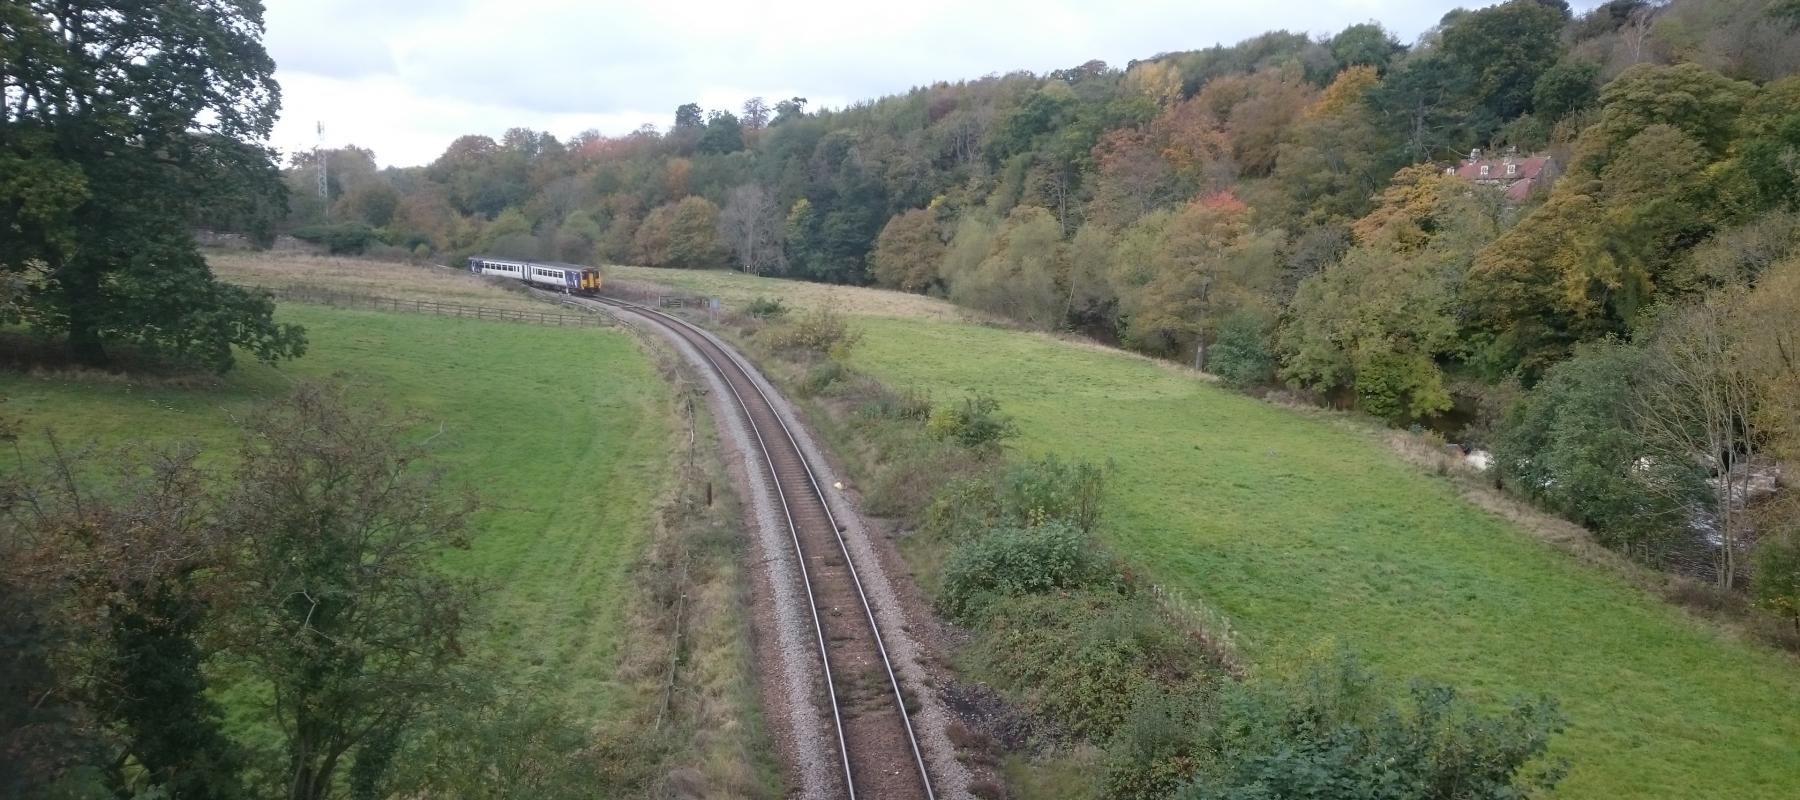 Esk Valley Railway with views of the North York Moors National Park